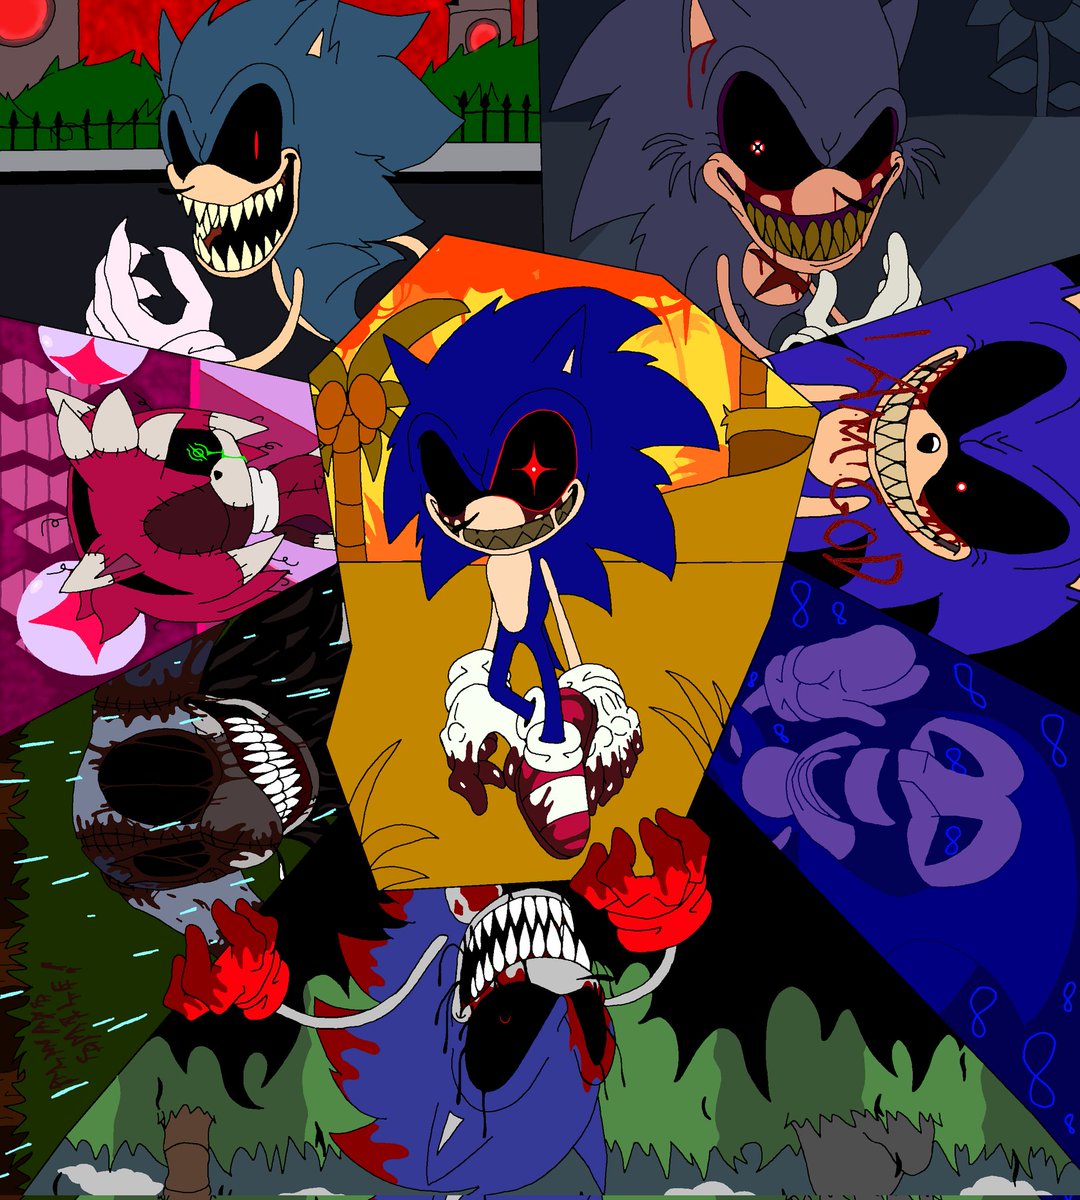 RoM funny promo art by @31Othello16588 #sonic #sonicexe #fnf #fnfmods